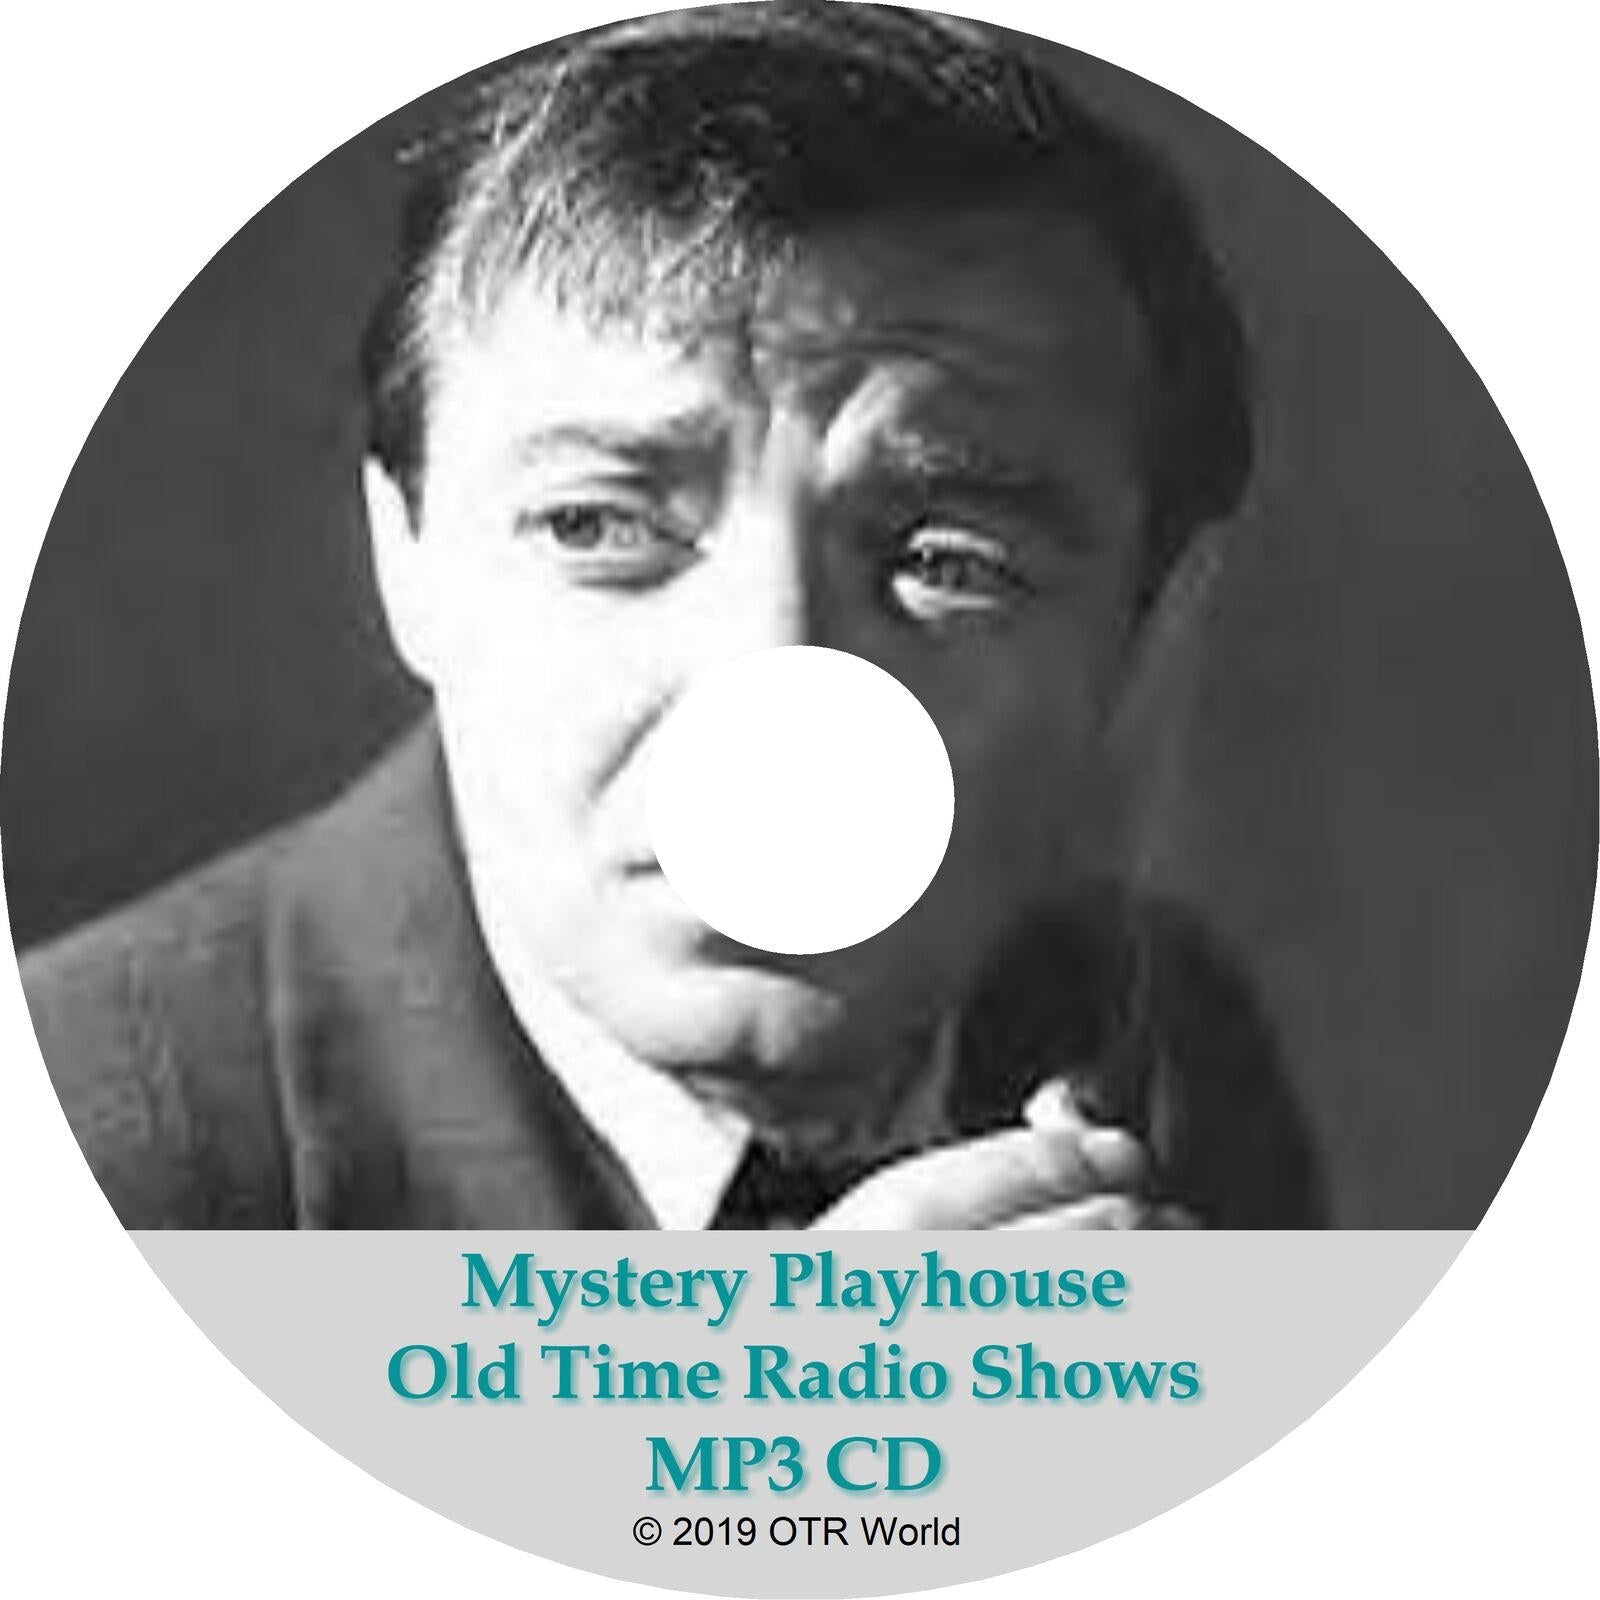 Mystery Playhouse Old Time Radio Shows 90 Episodes On MP3 CD